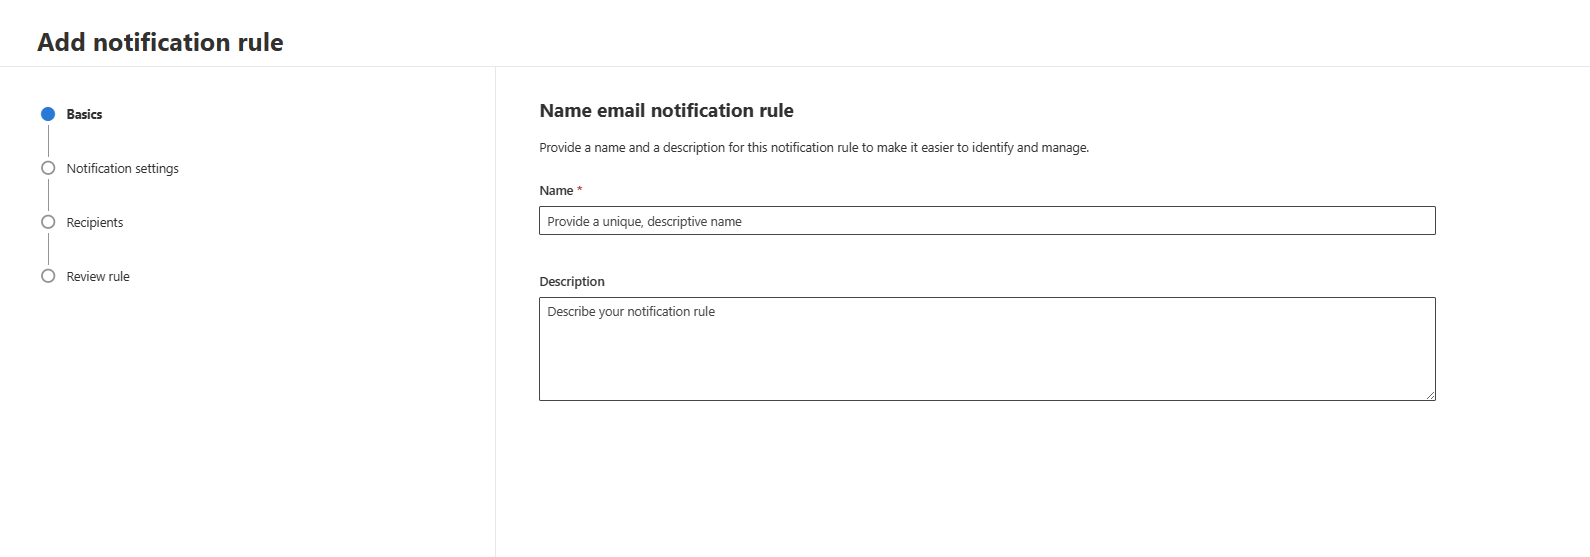 Basics section of the add notification rule